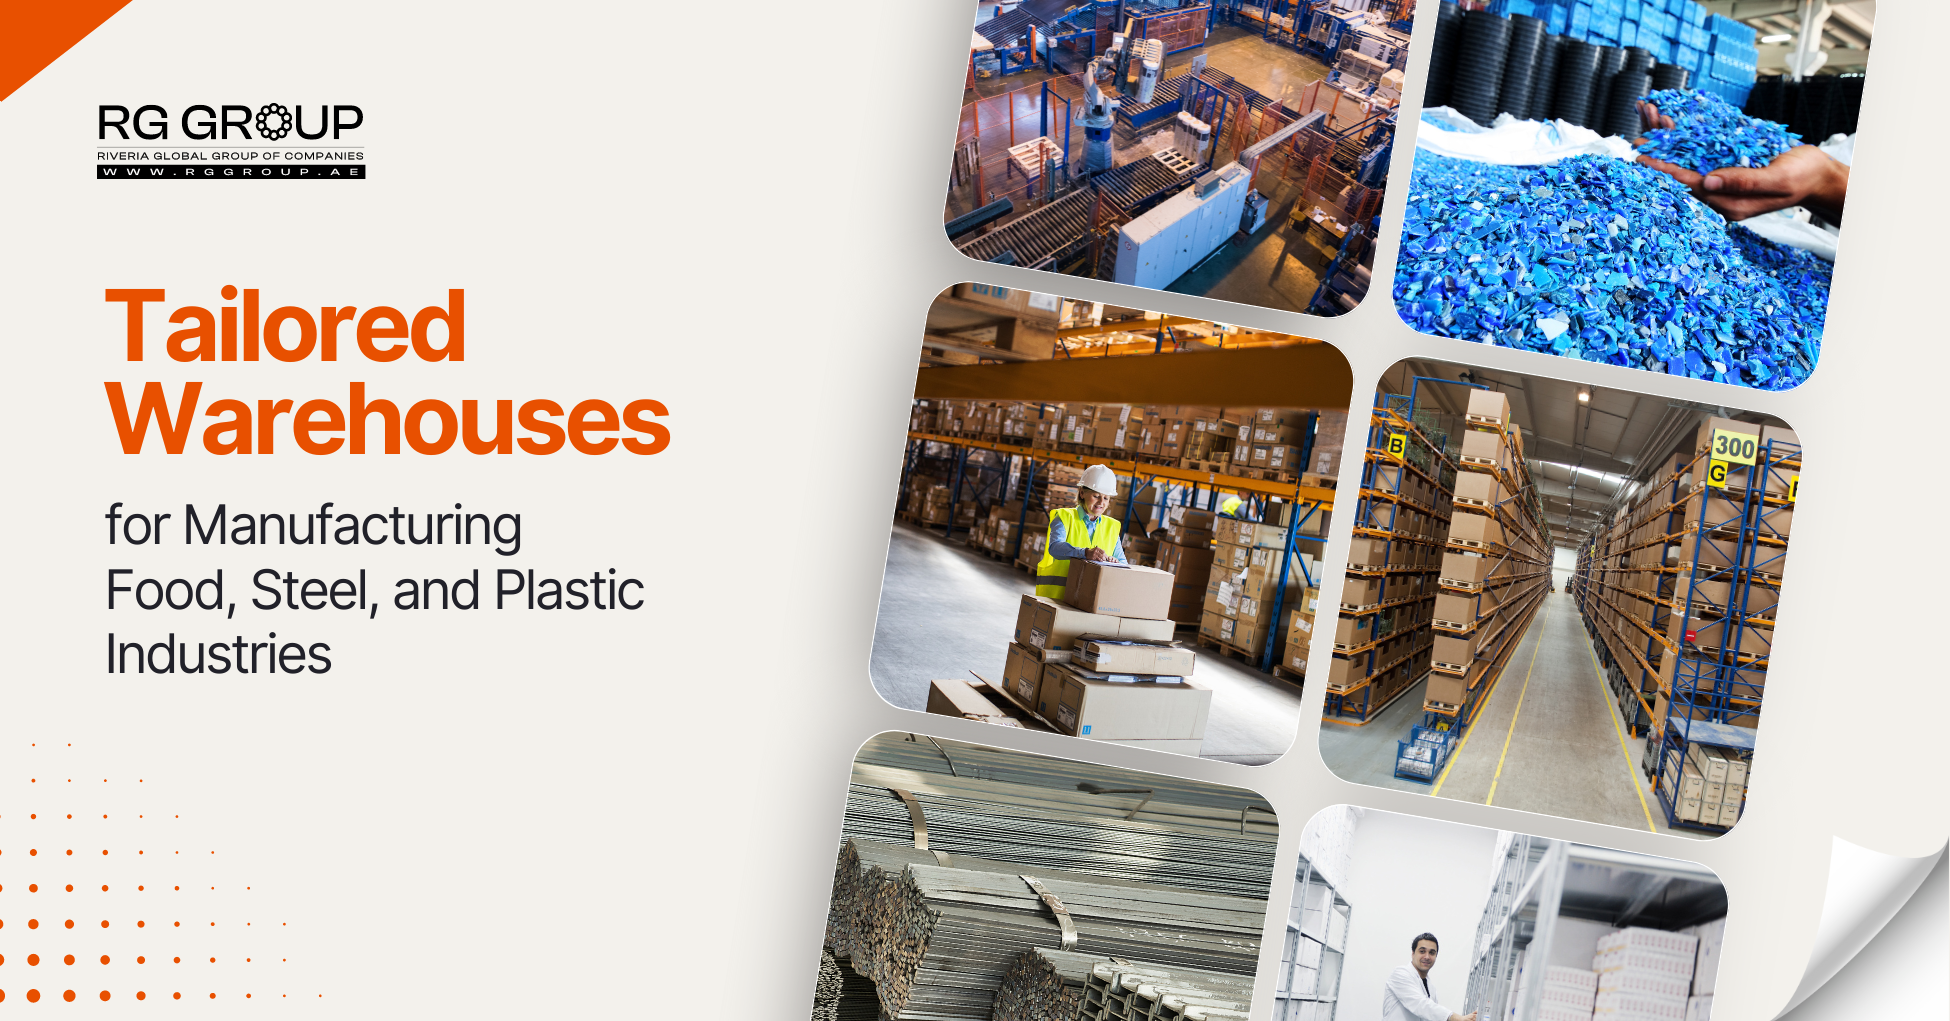 RG Group’s Tailored Warehouses for Manufacturing, Food Steel and Plastic Industries